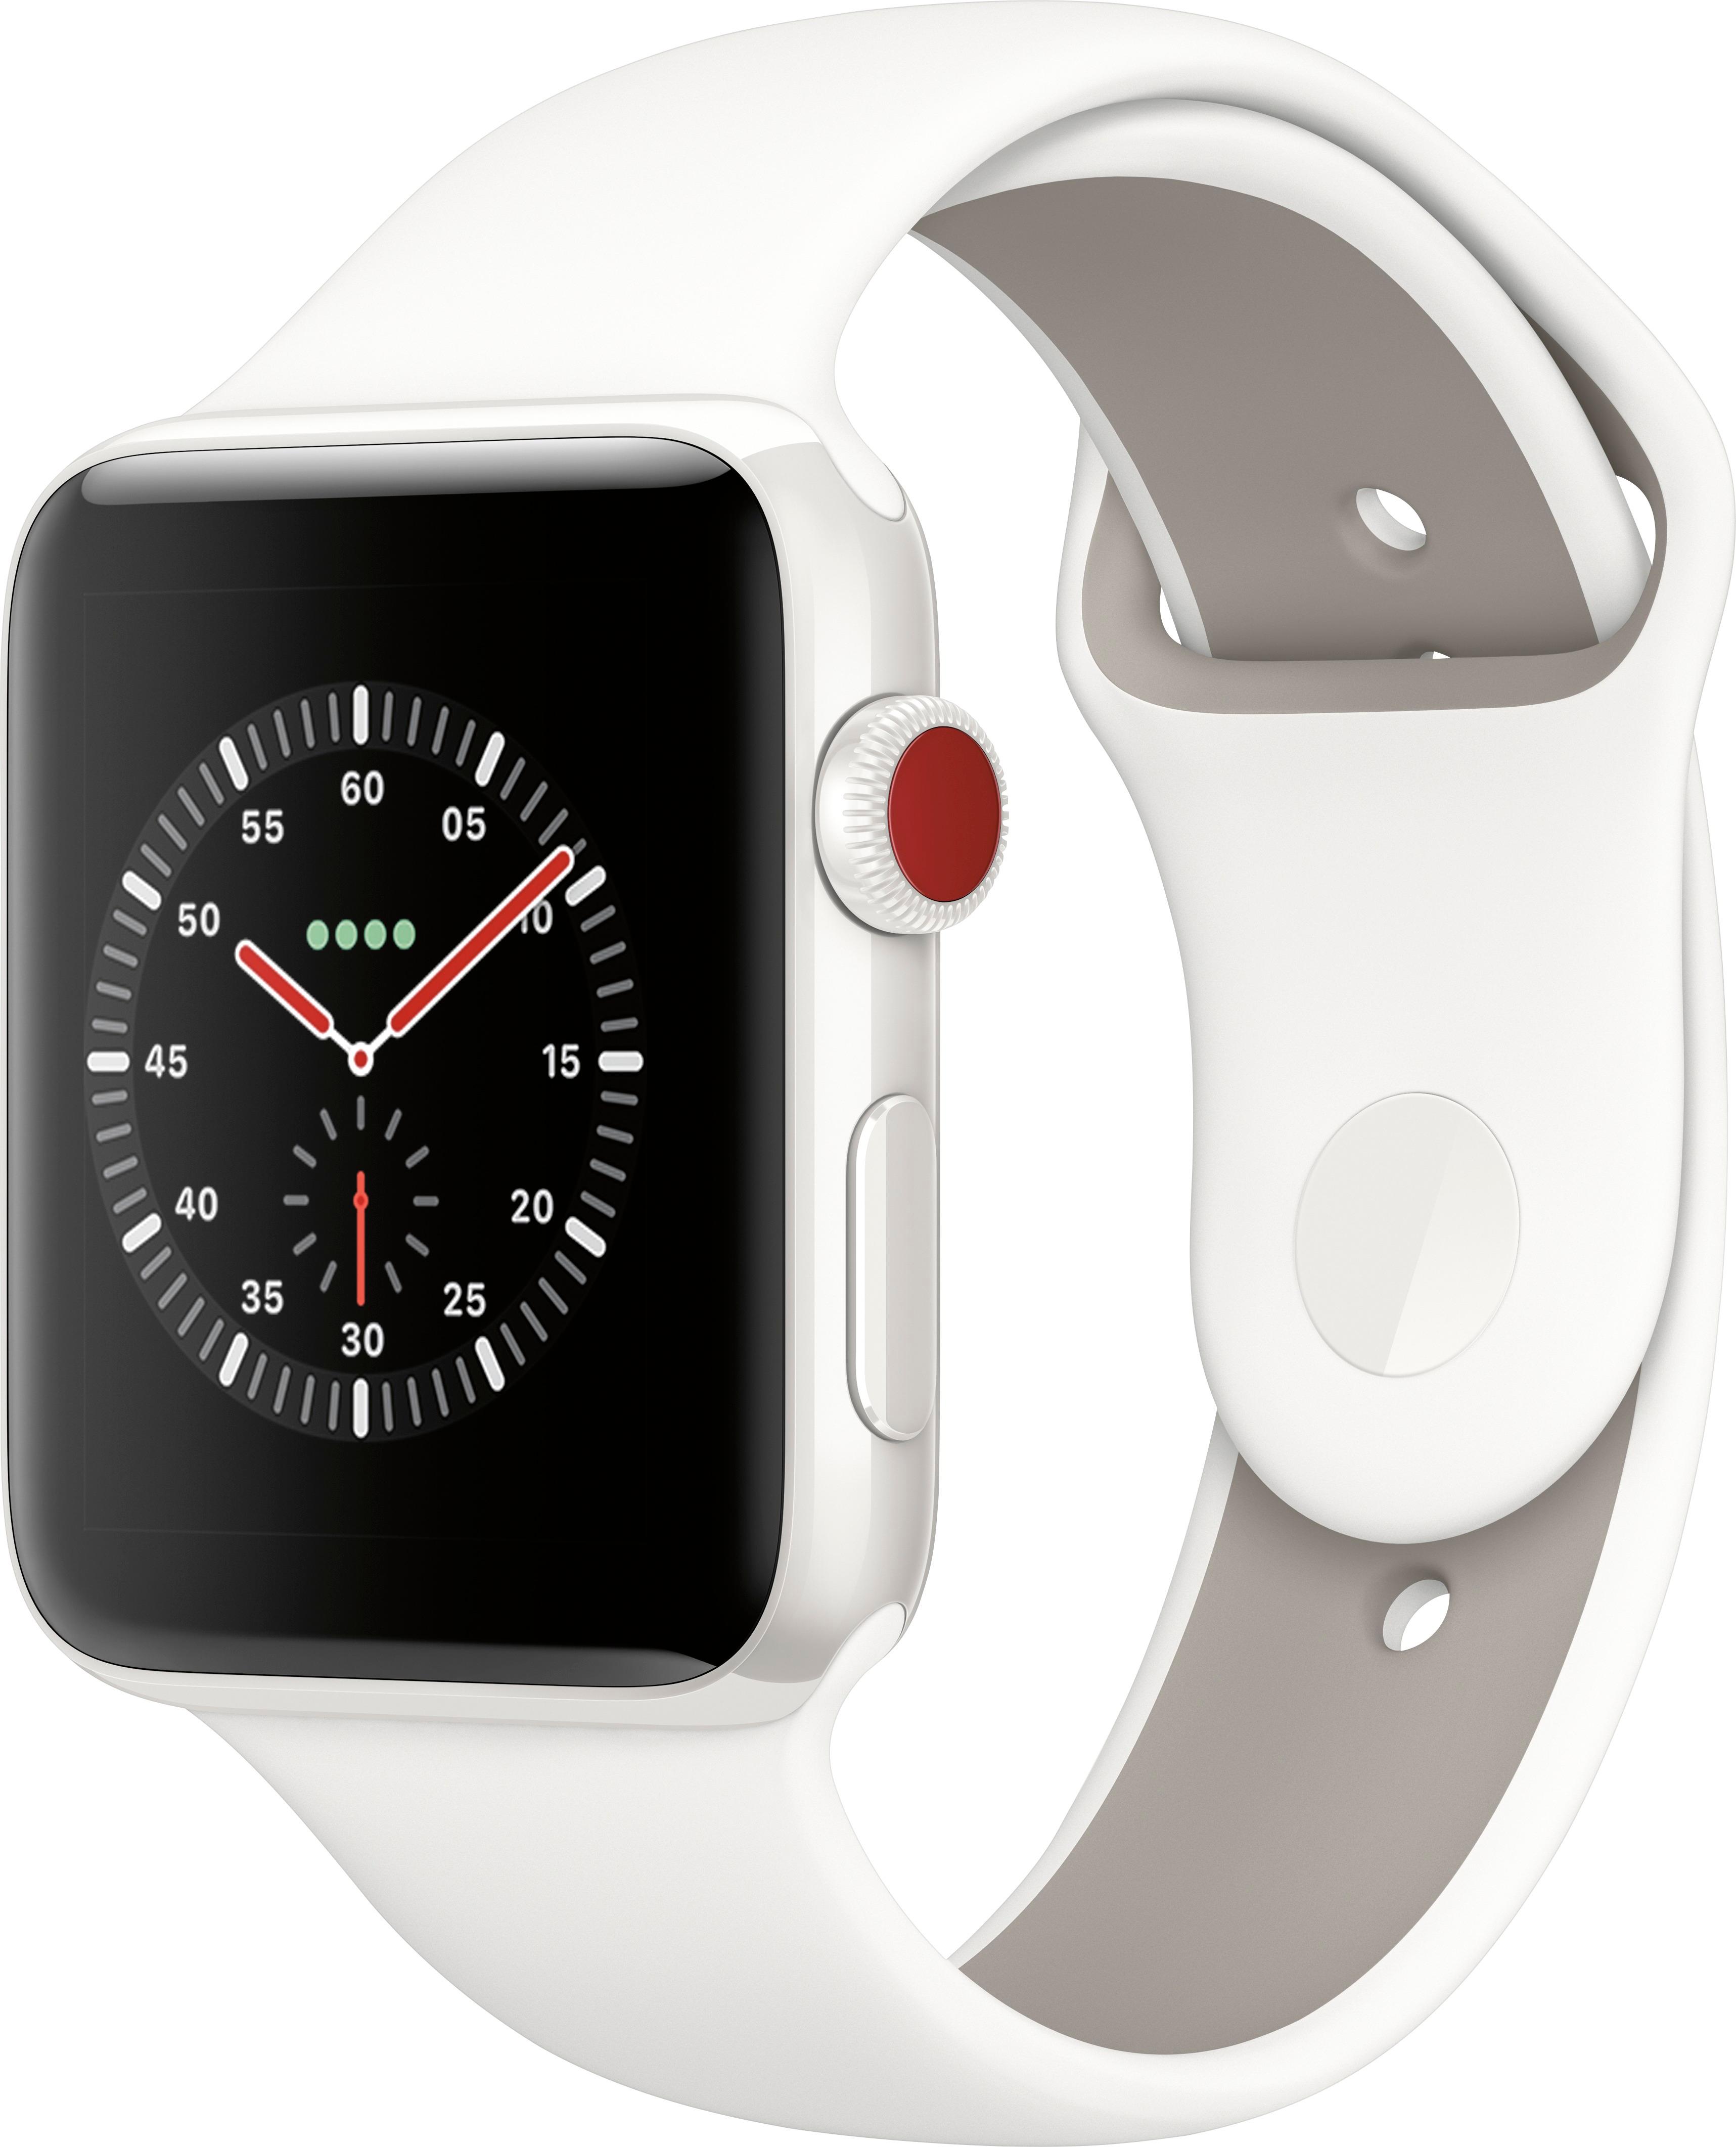 Angle View: Apple Watch Series 5 (GPS + Cellular) 40mm Silver Aluminum Case with White Sport Band - Silver Aluminum (AT&T)